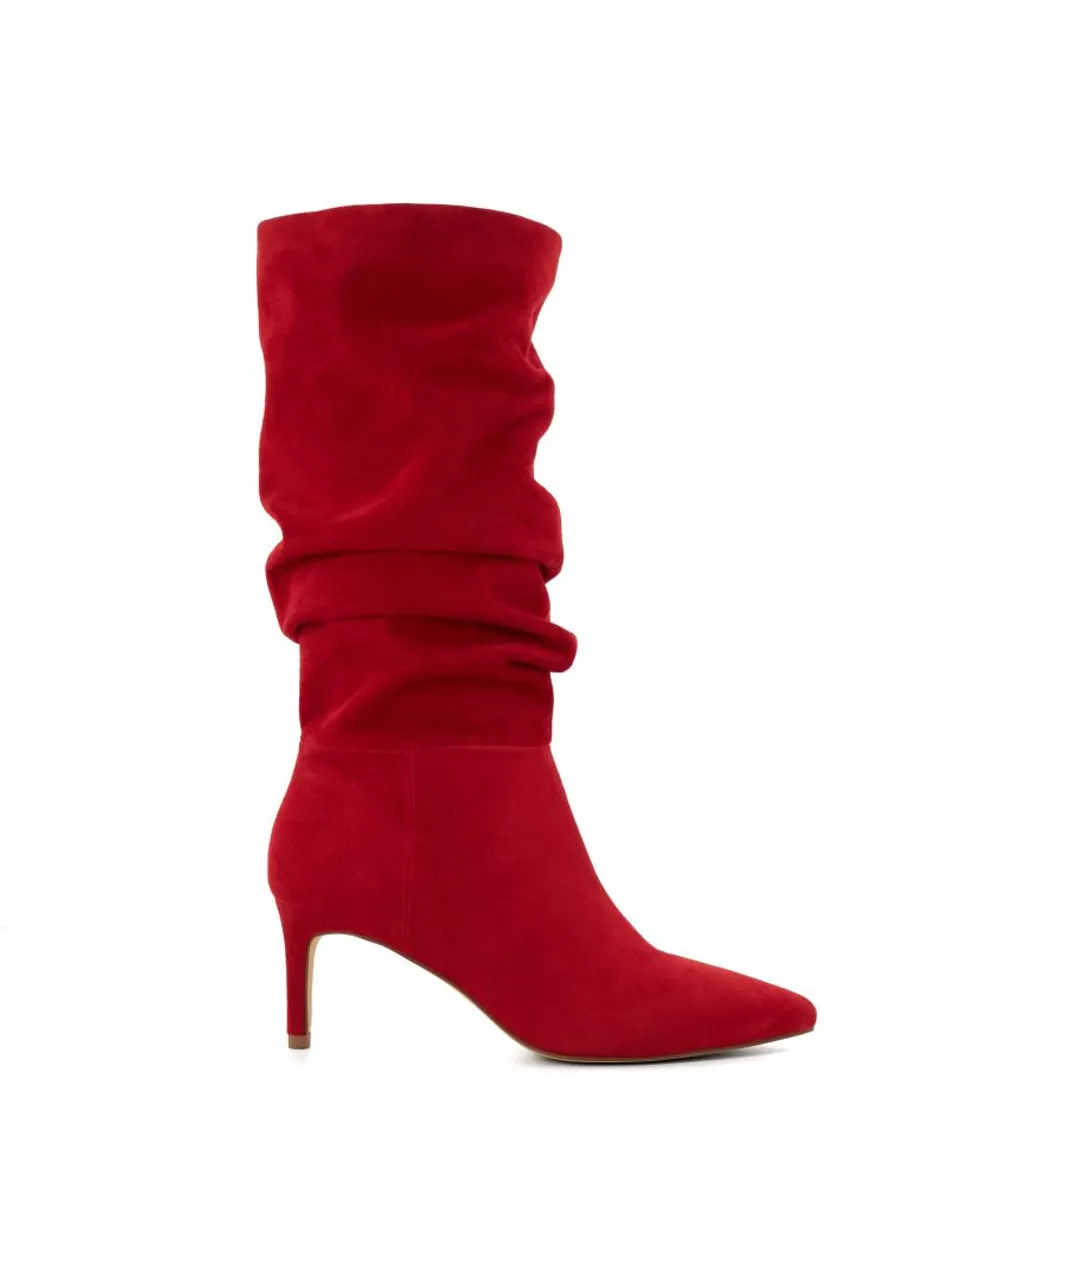 Dune London Womens Ladies Slouch - Ruched Calf-Length Boots - Red Suede